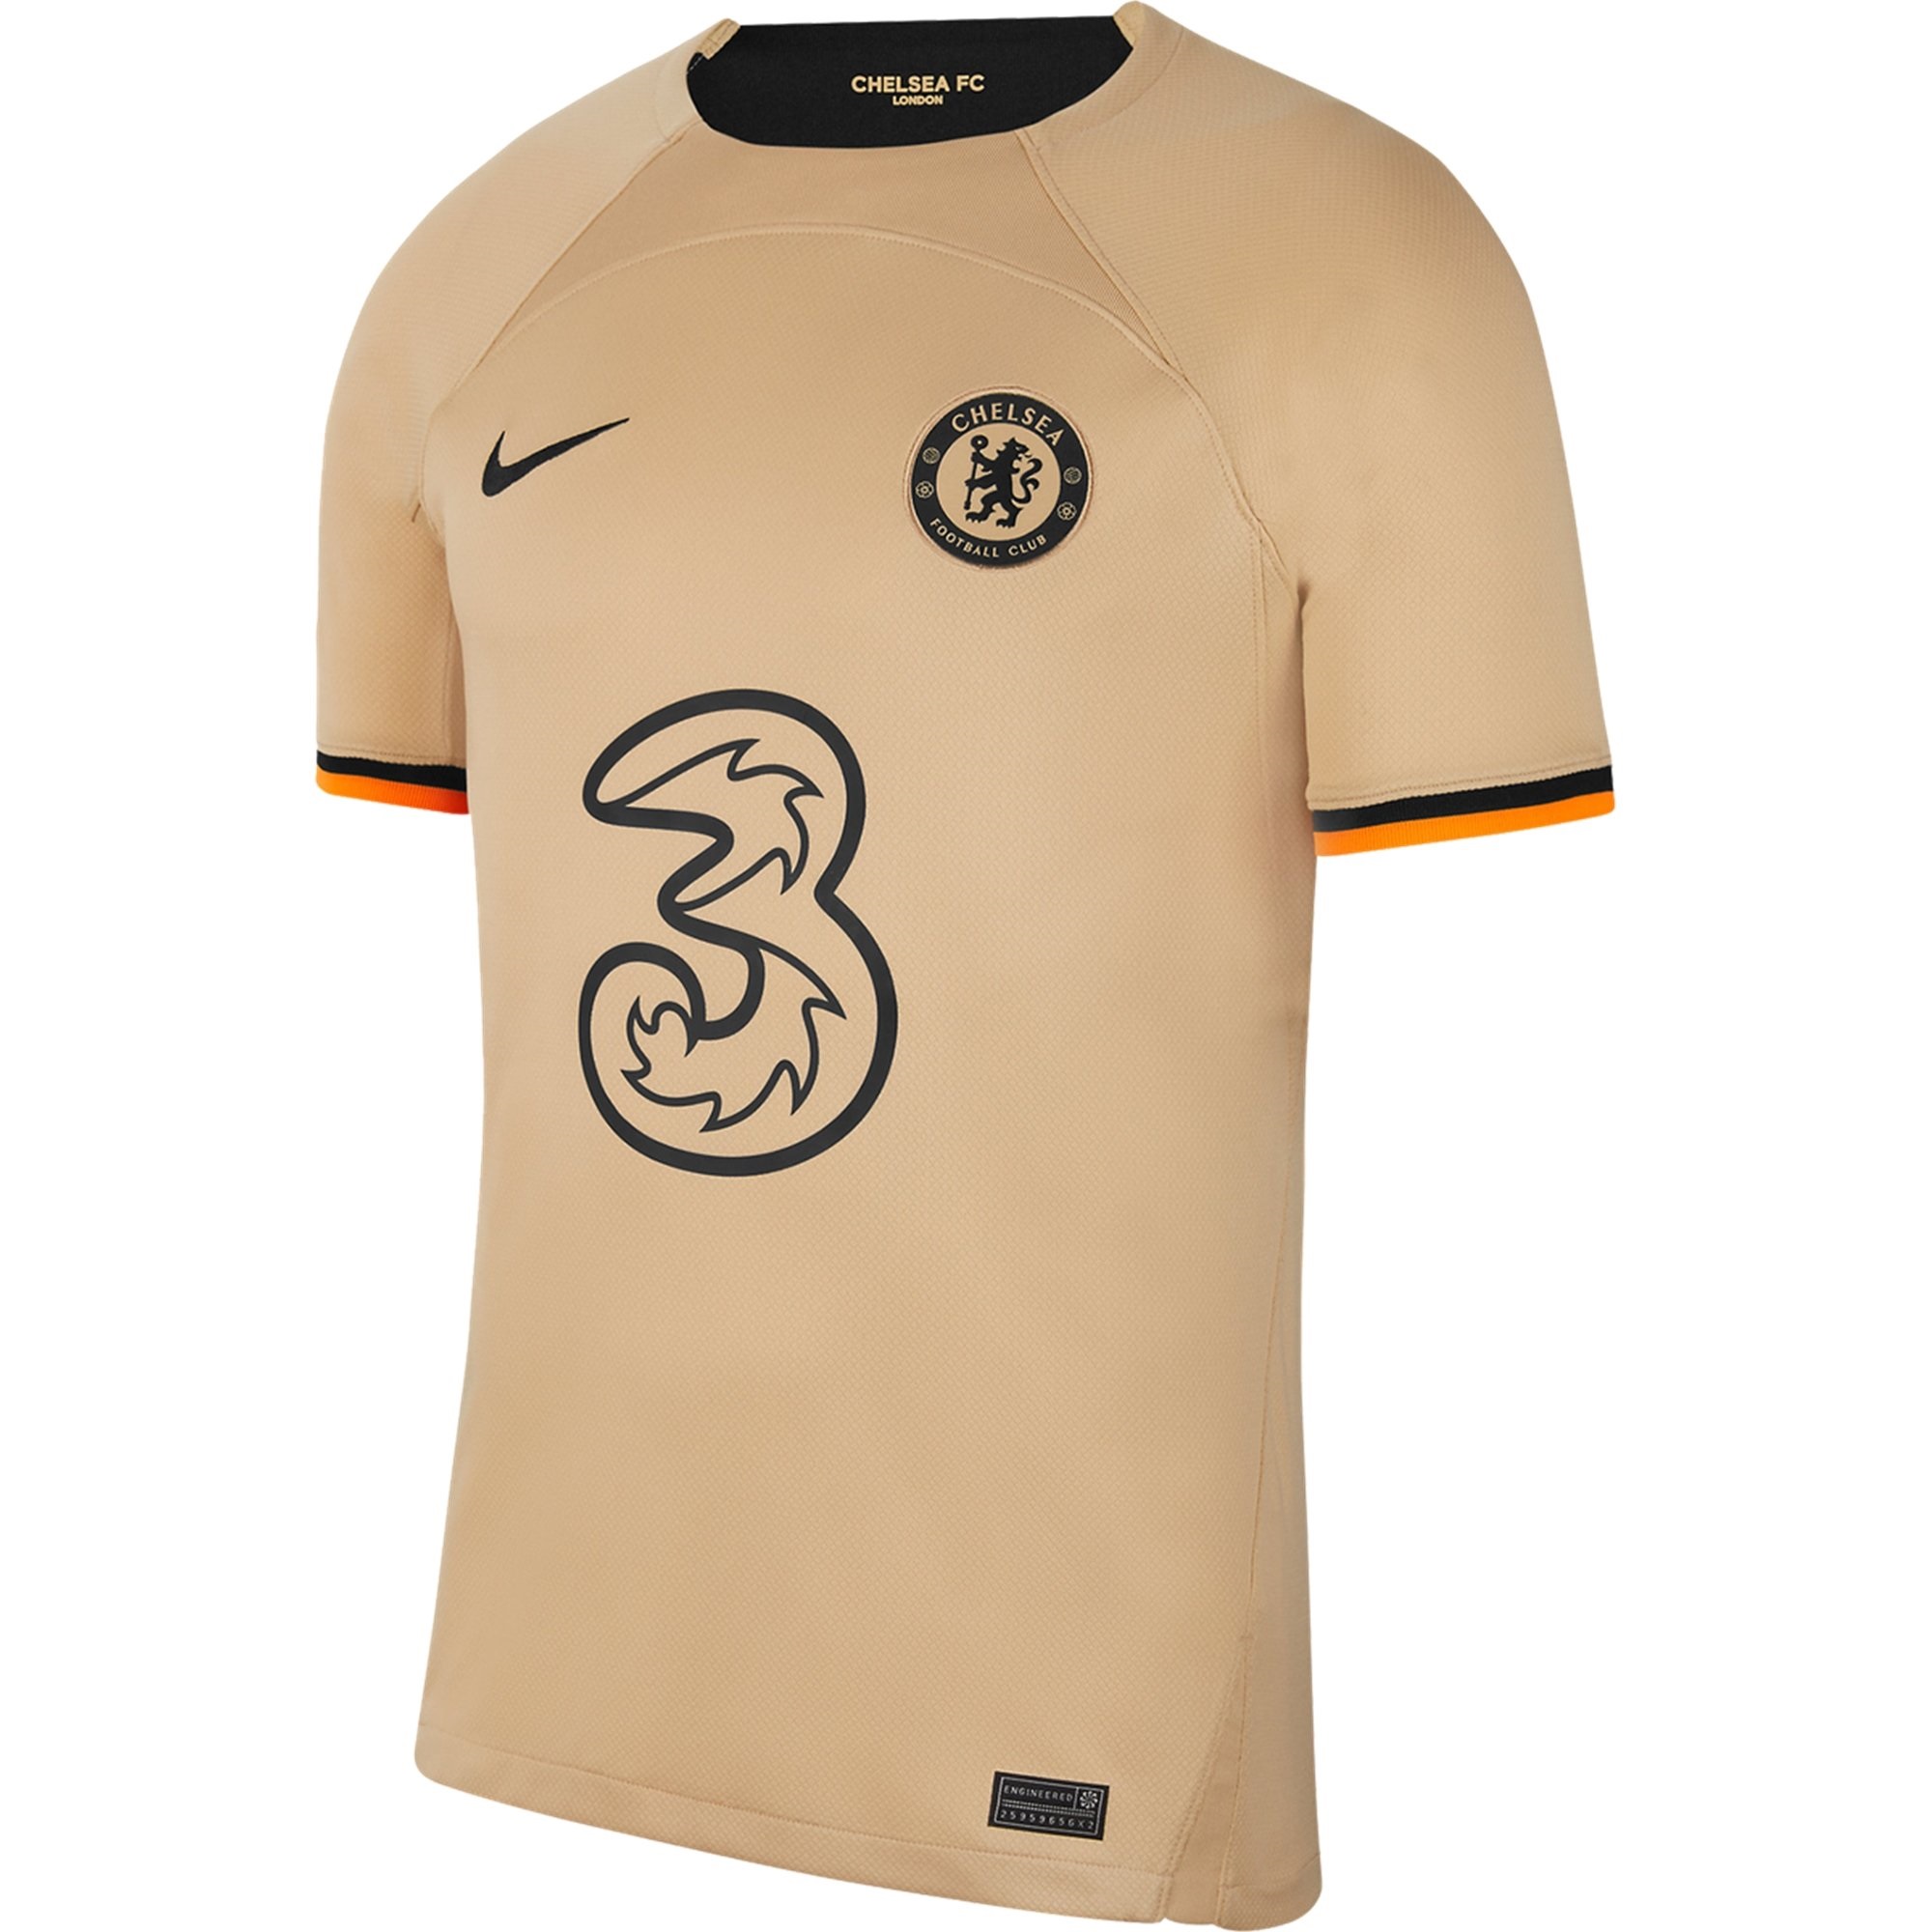 Chelsea 22/23 Third Jersey by Nike – Arena Jerseys